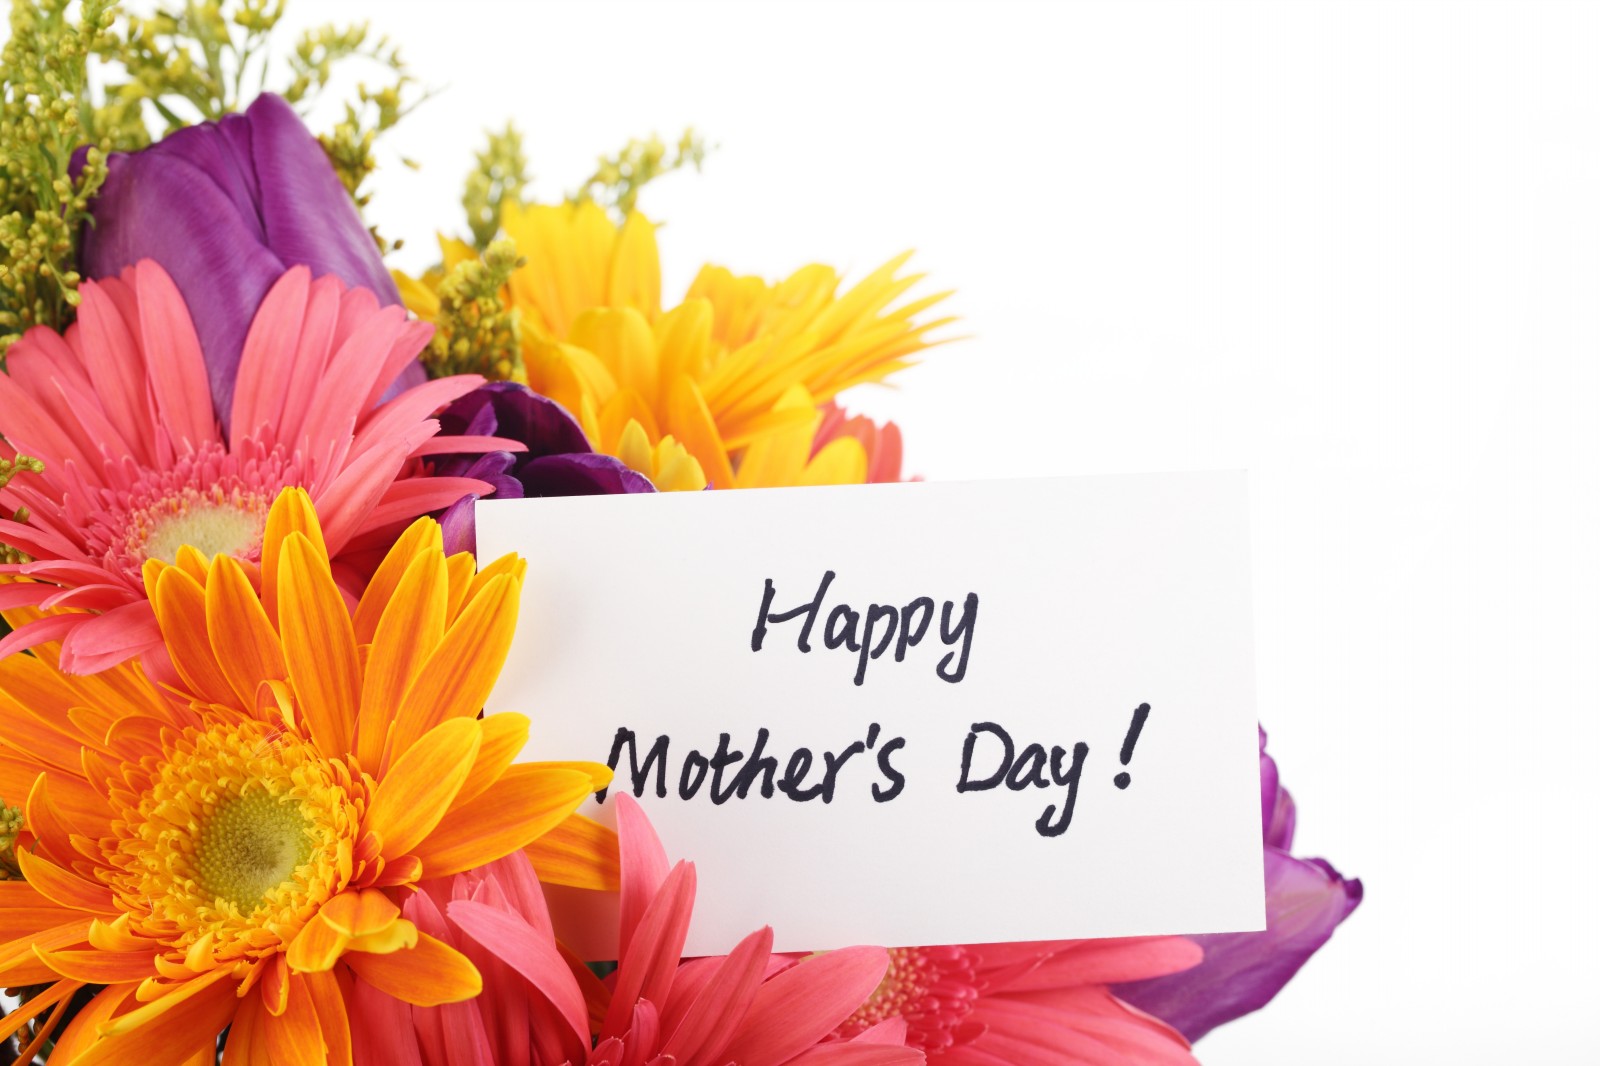 Sweet Happy Mother's Day Quote